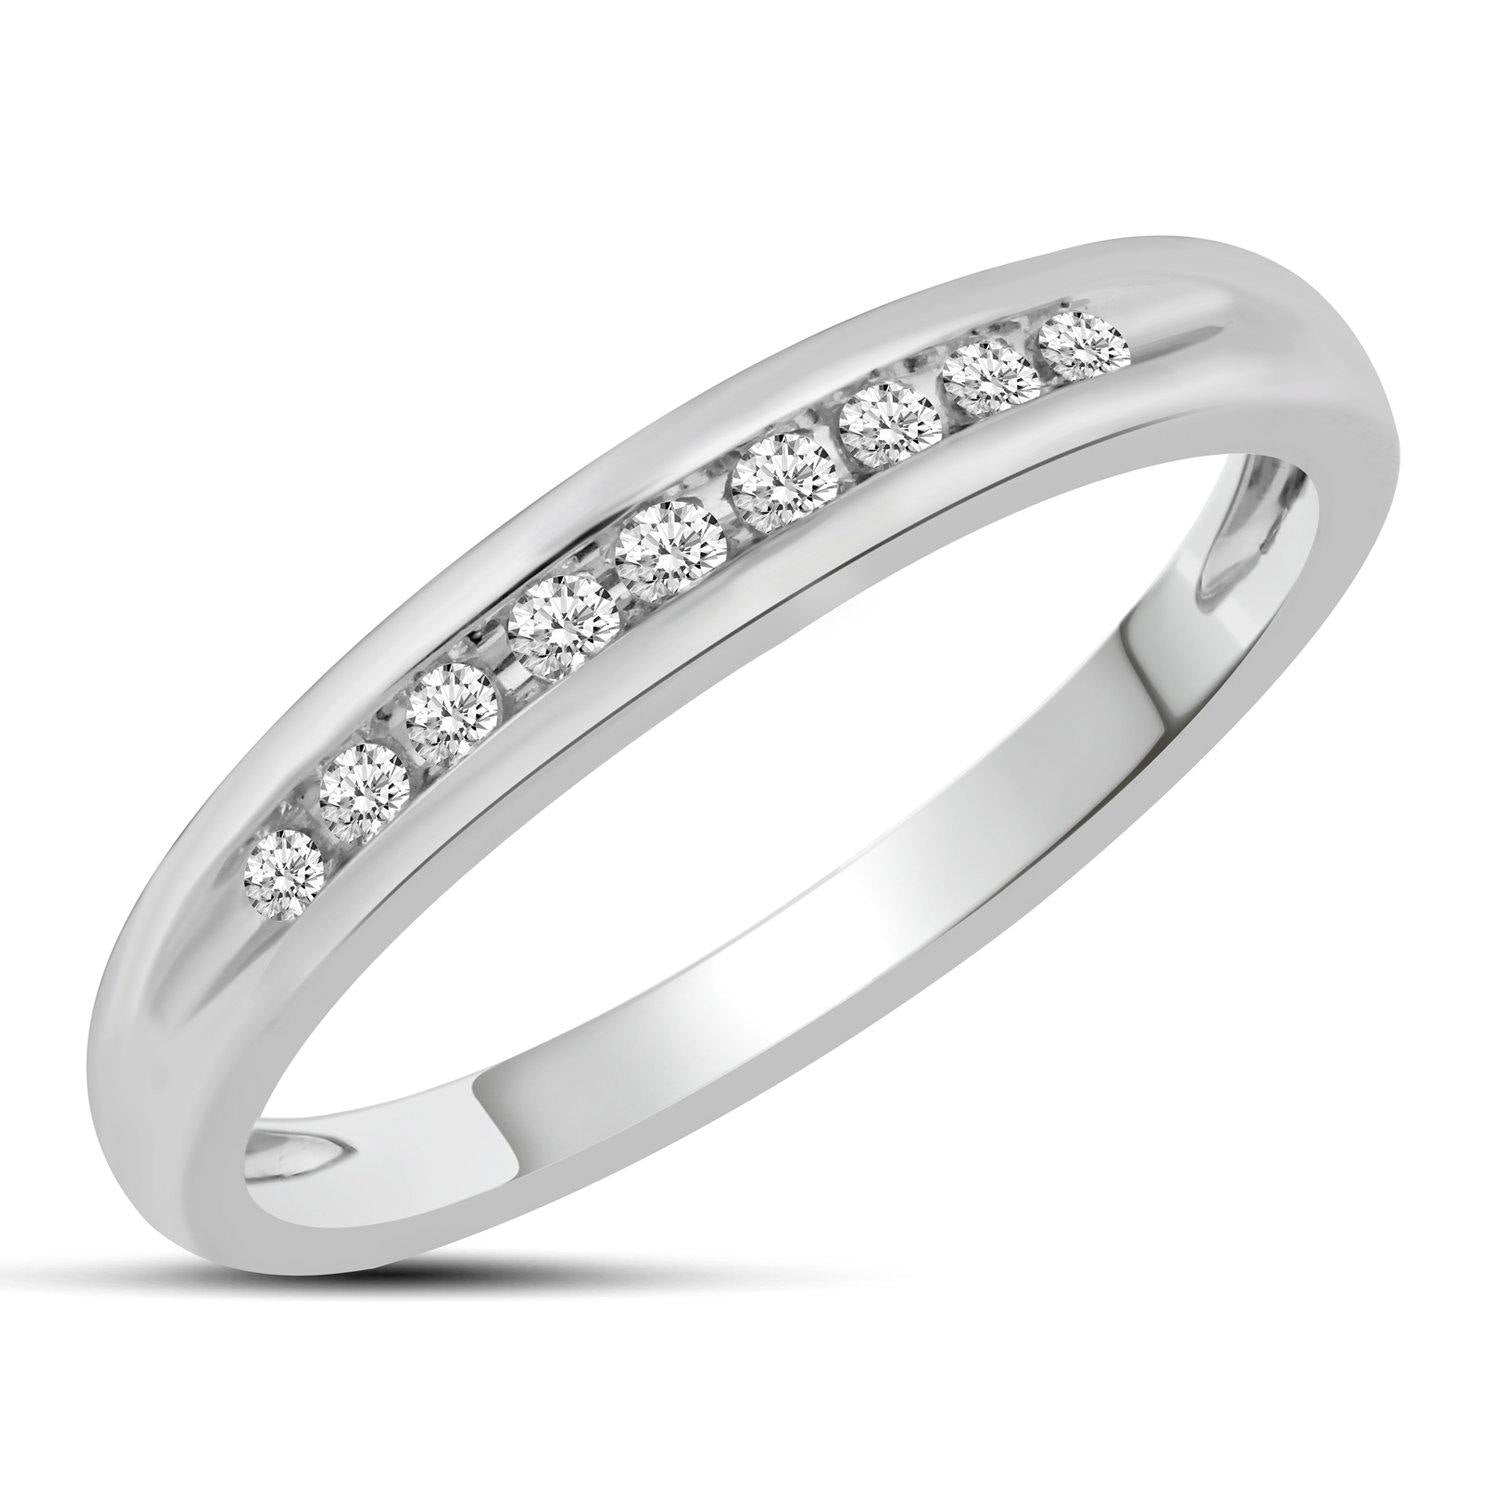 1/10CT TW Wedding Band for her Set in 10KT White Gold